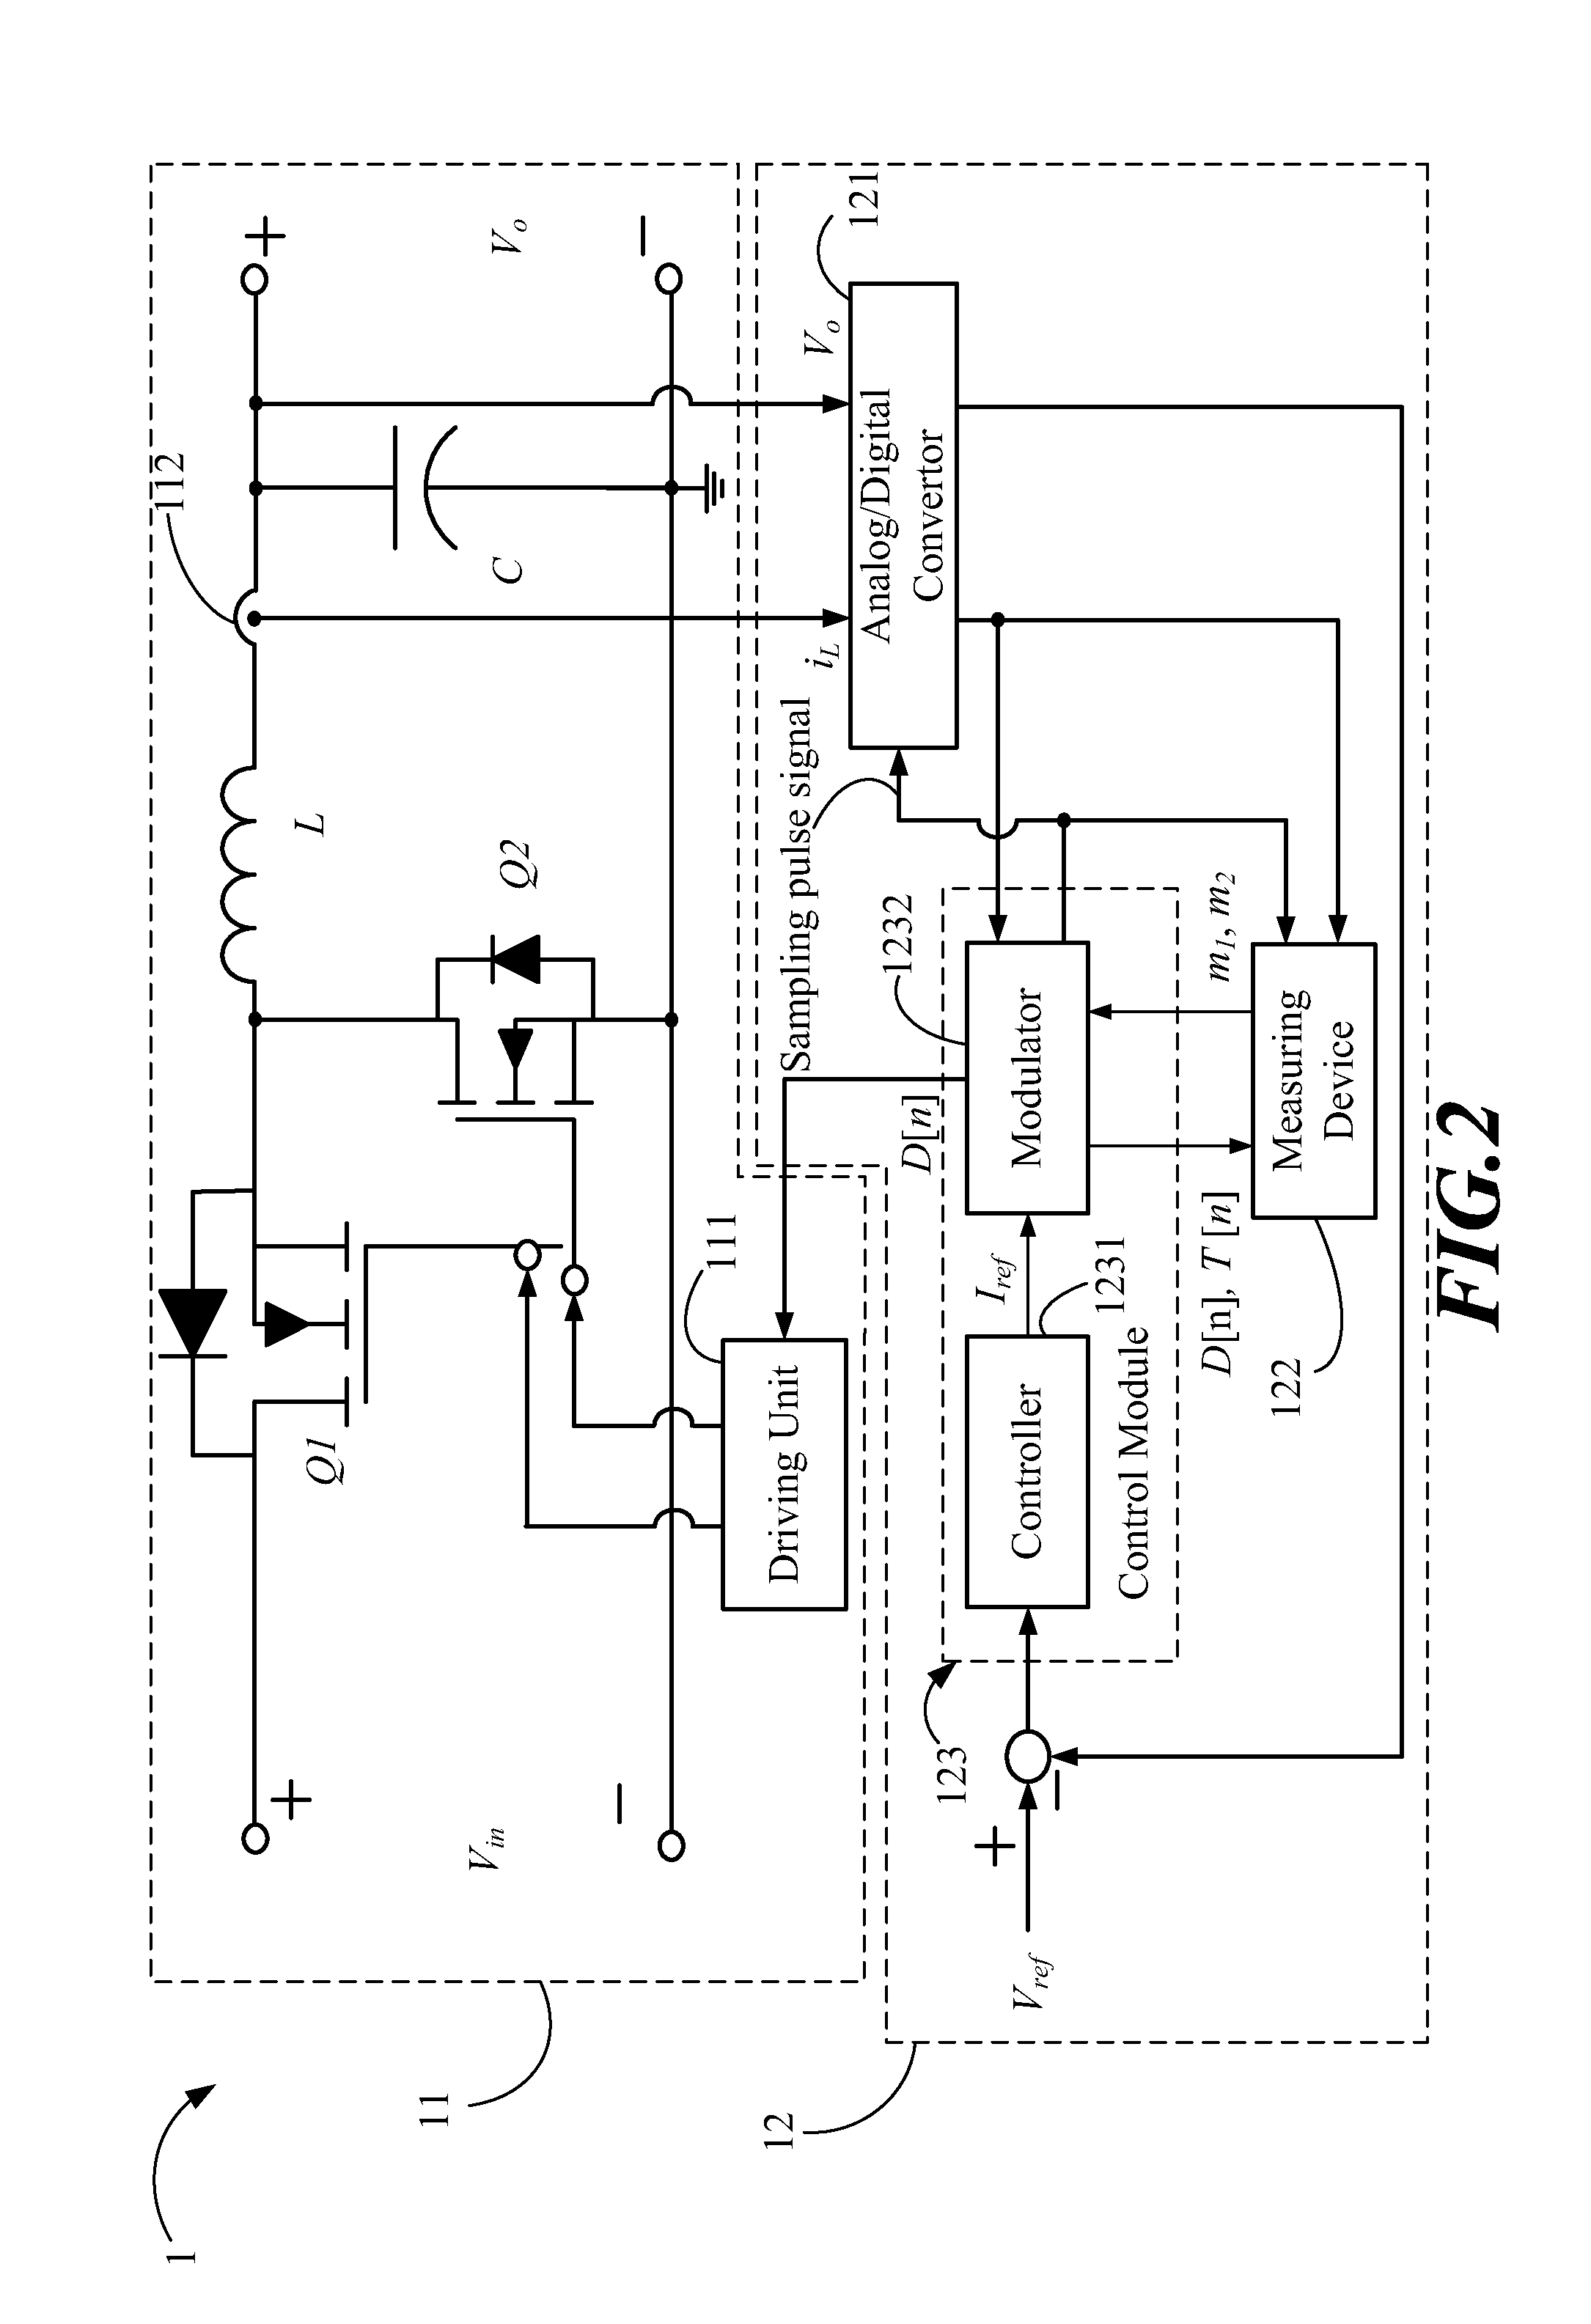 Driving control device and method for power converting system